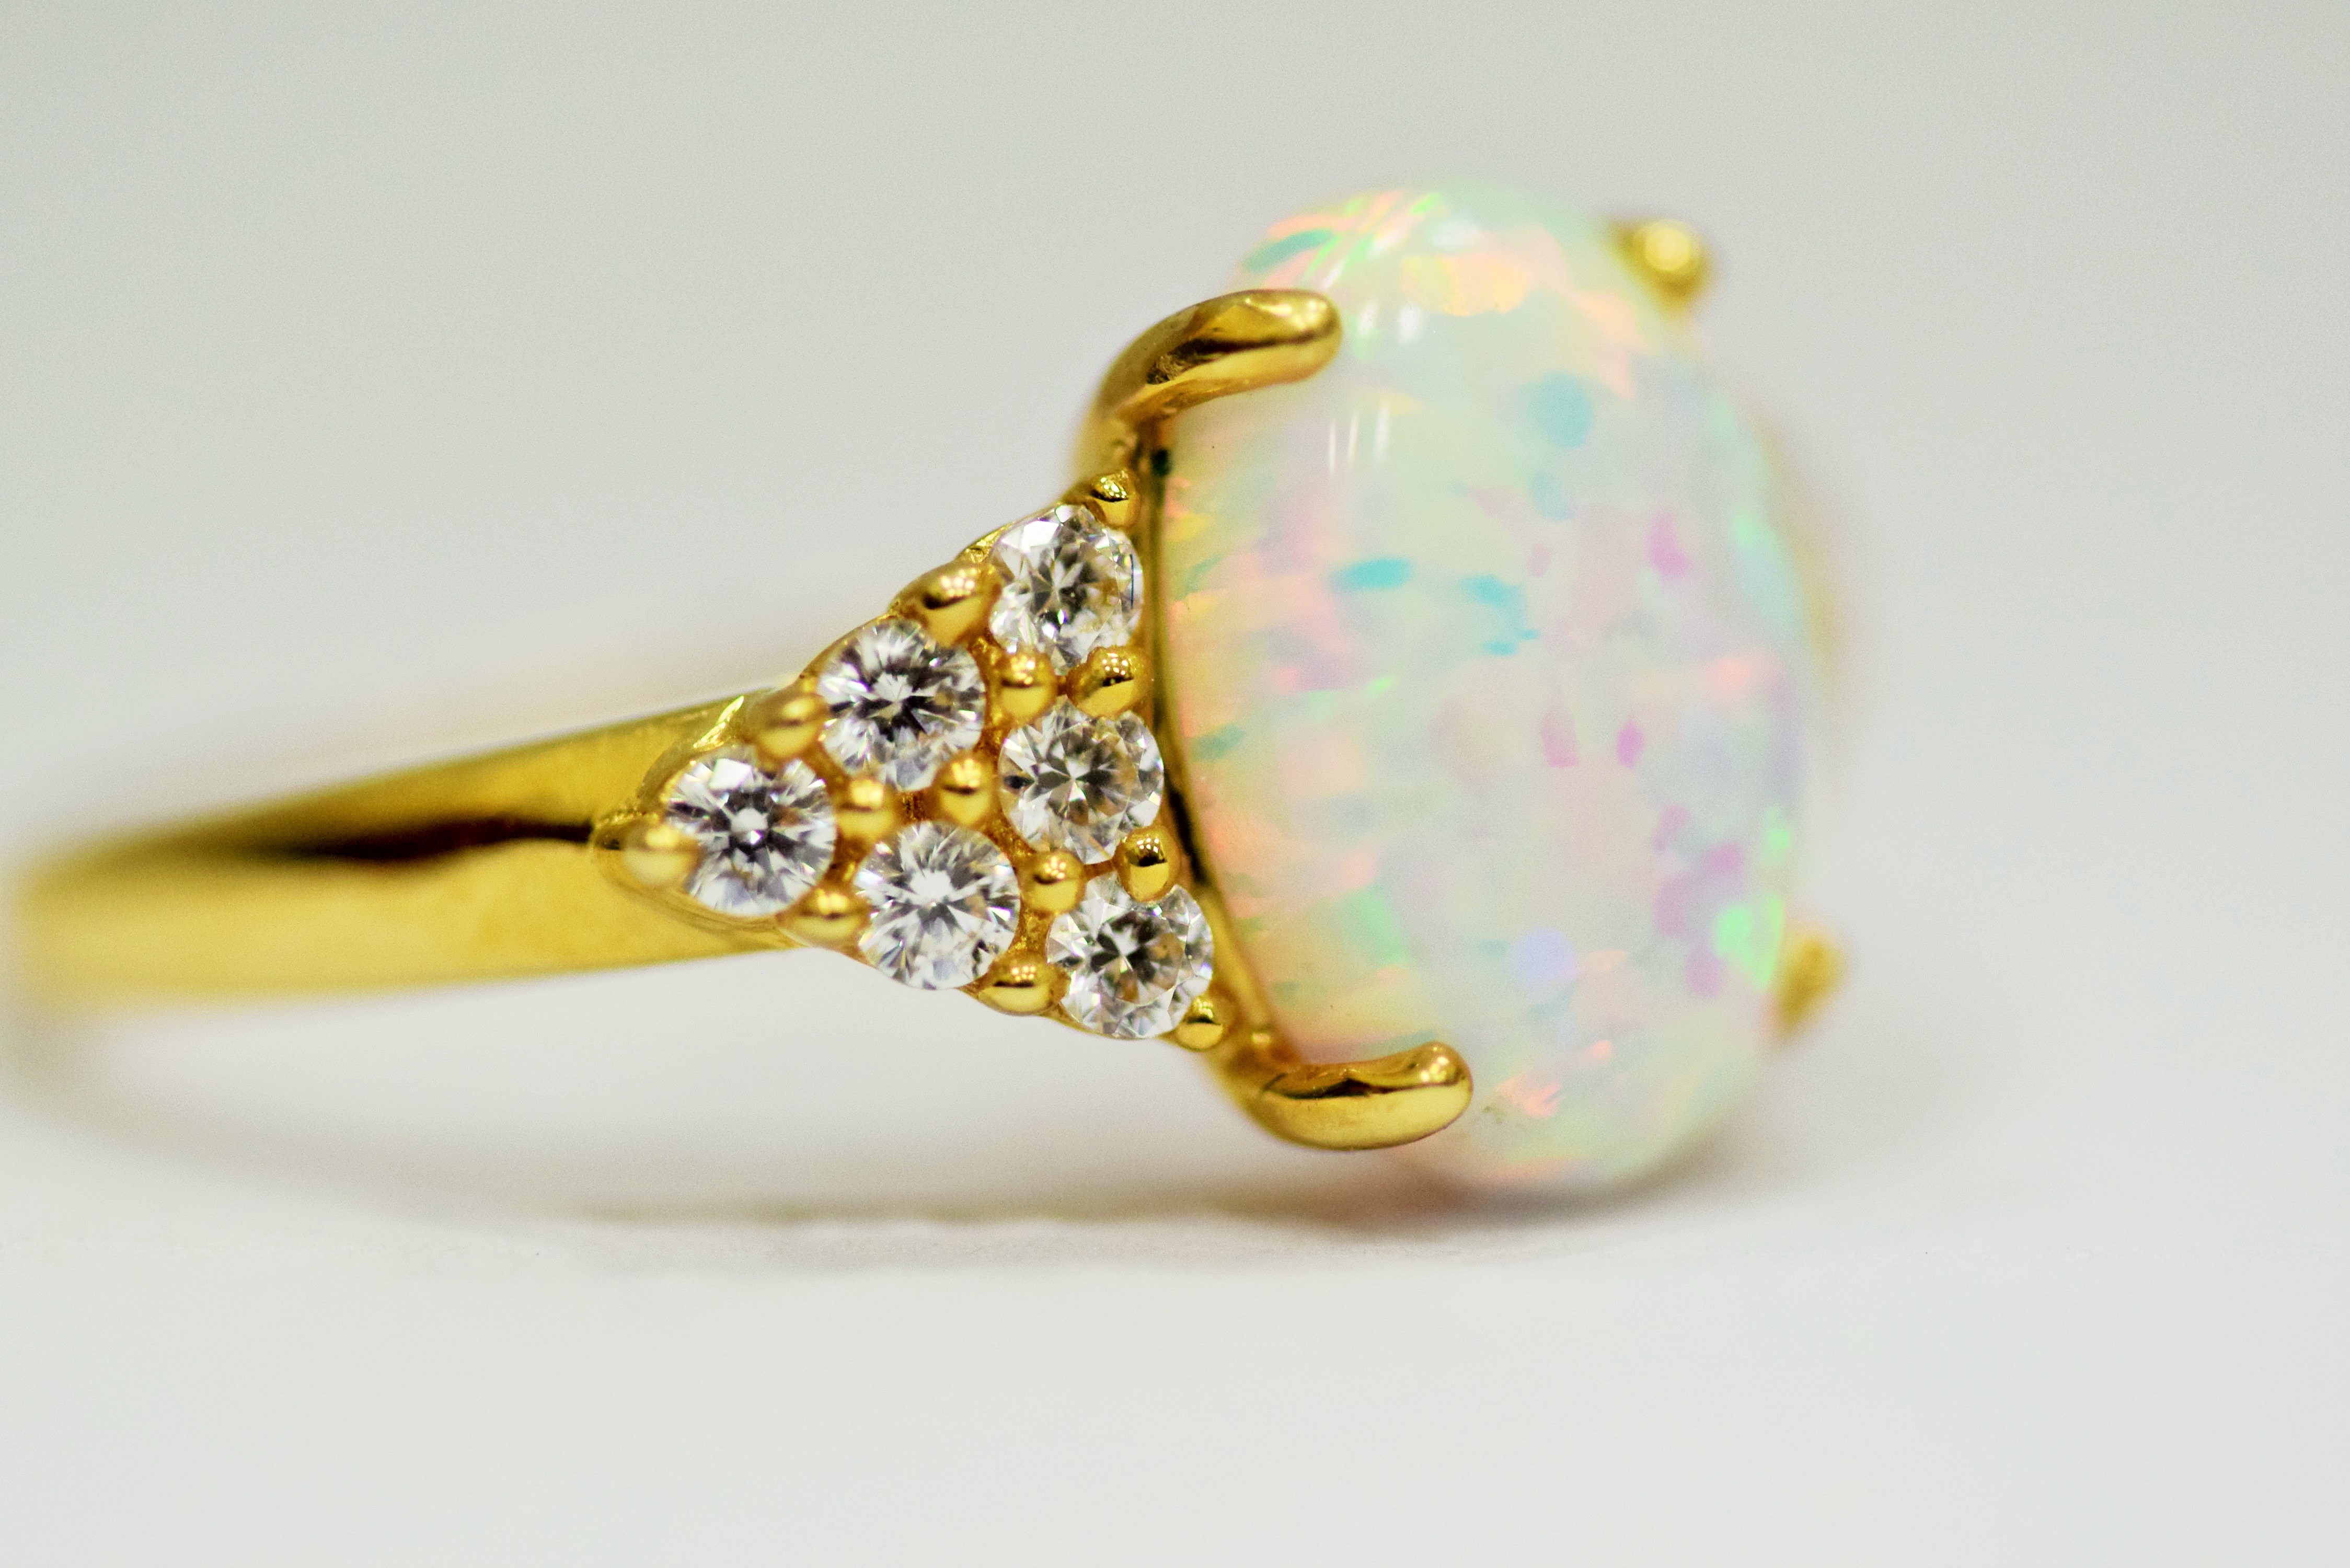 14ct Yellow Gold Ring set with a large central Opal which measures 12 x 8mm with 12 clear gemstones  - Image 2 of 4